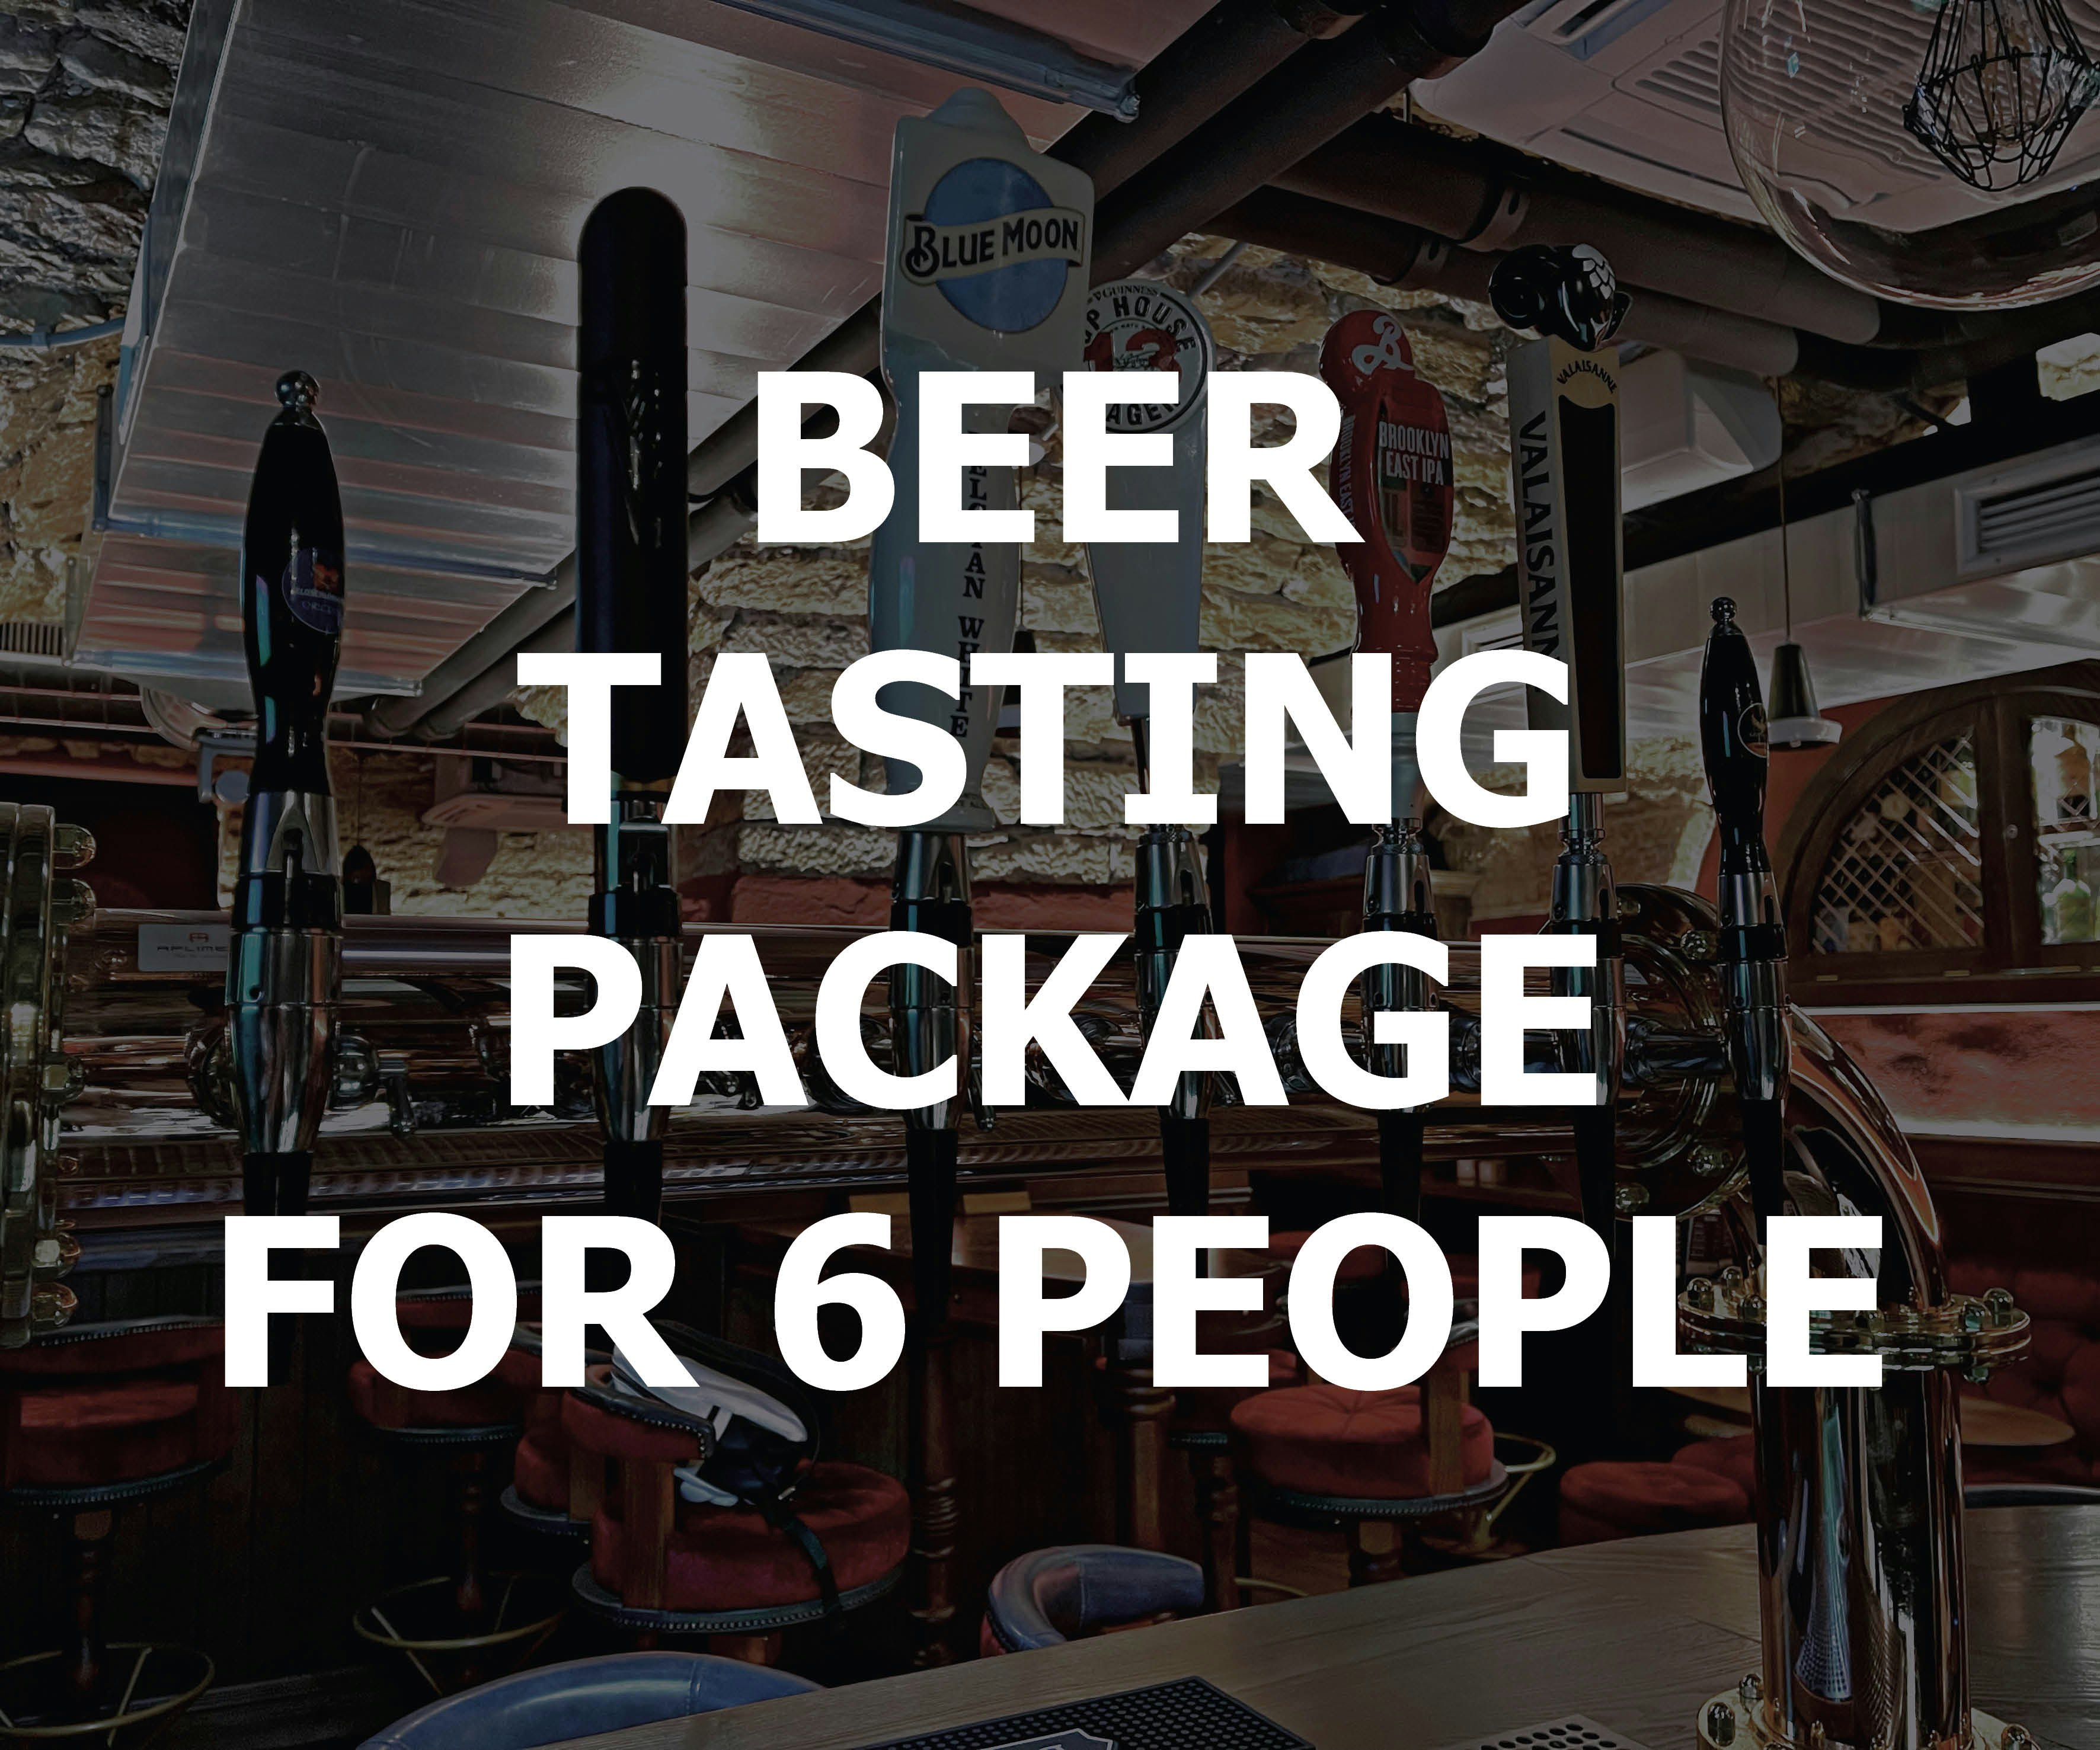 Beer tasting at The Auld Dubliner - package for 6 people